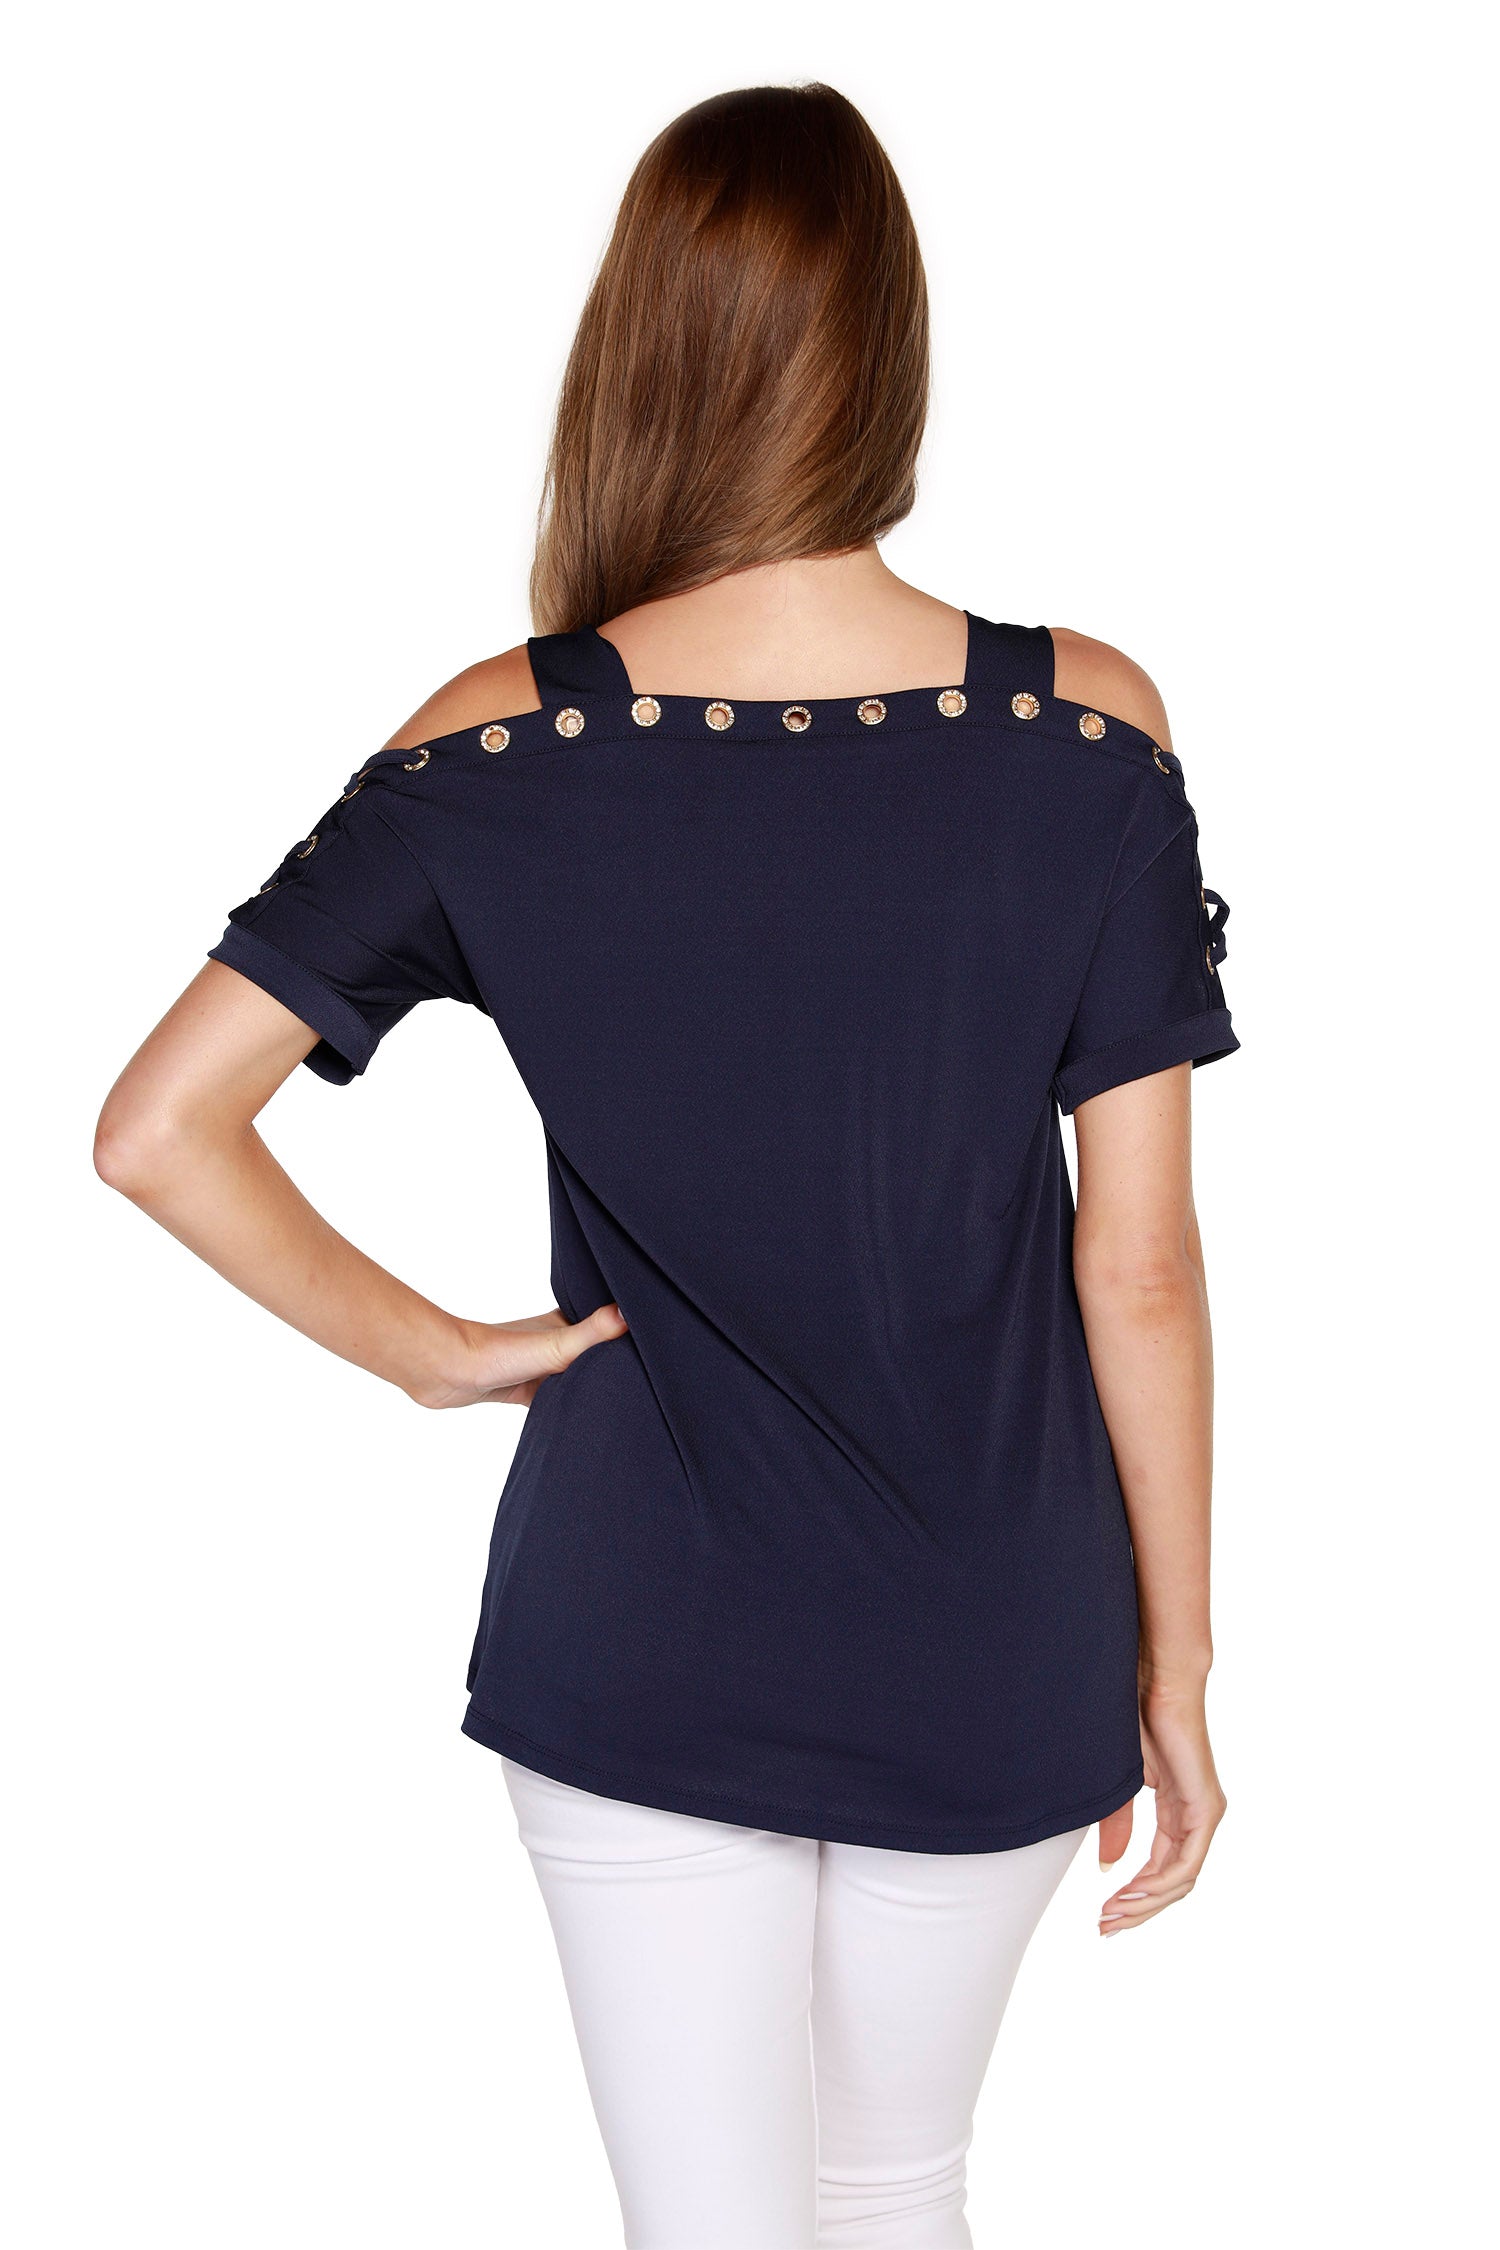 Women's Short Sleeve Cold Shoulder Top with Gold Rhinestone Lace Up Detail